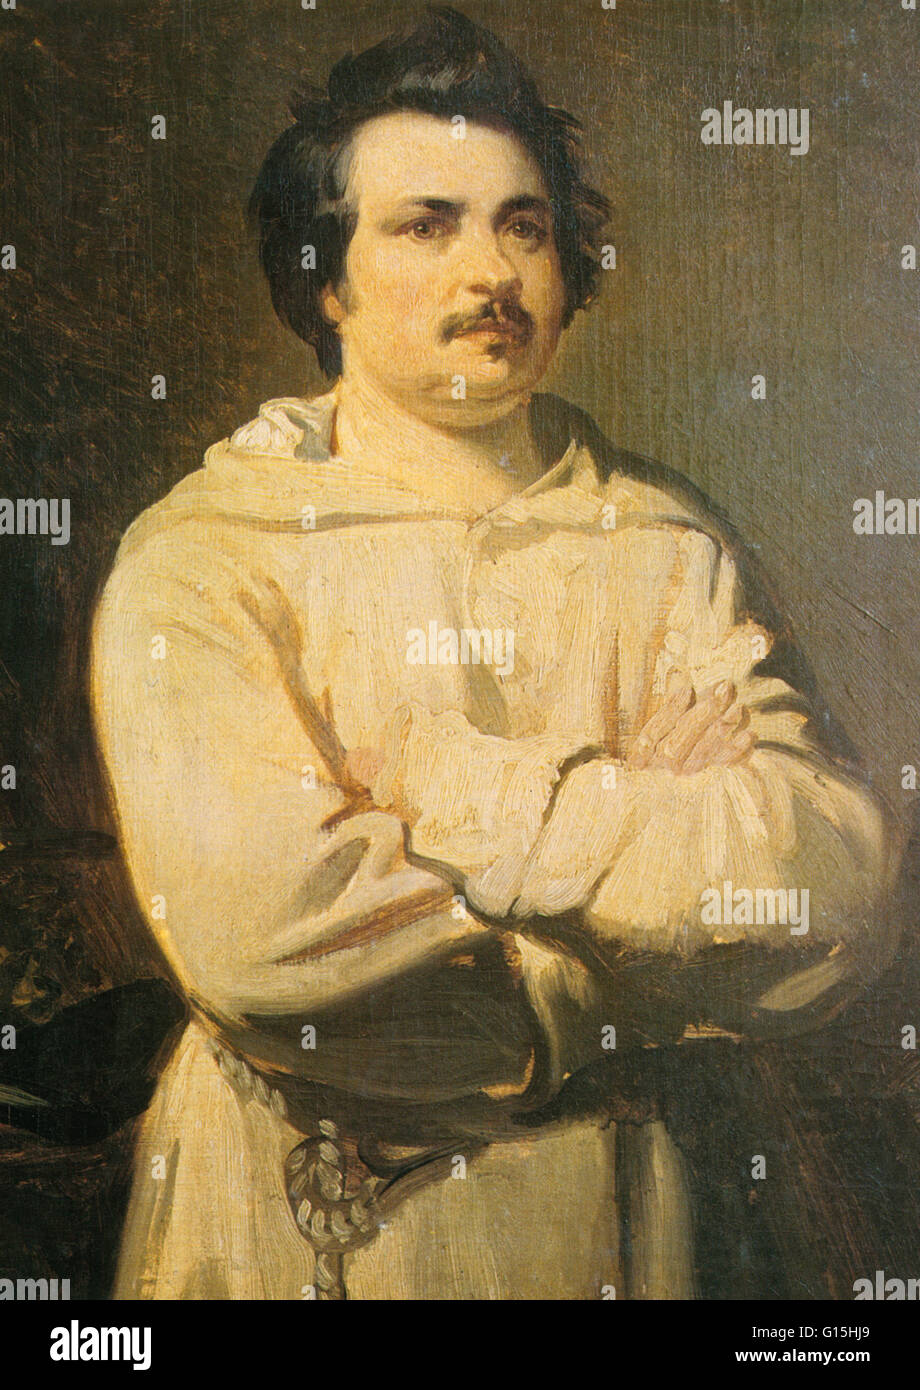 Honore de Balzac (1799-1850) was a French novelist and playwright. Stock Photo